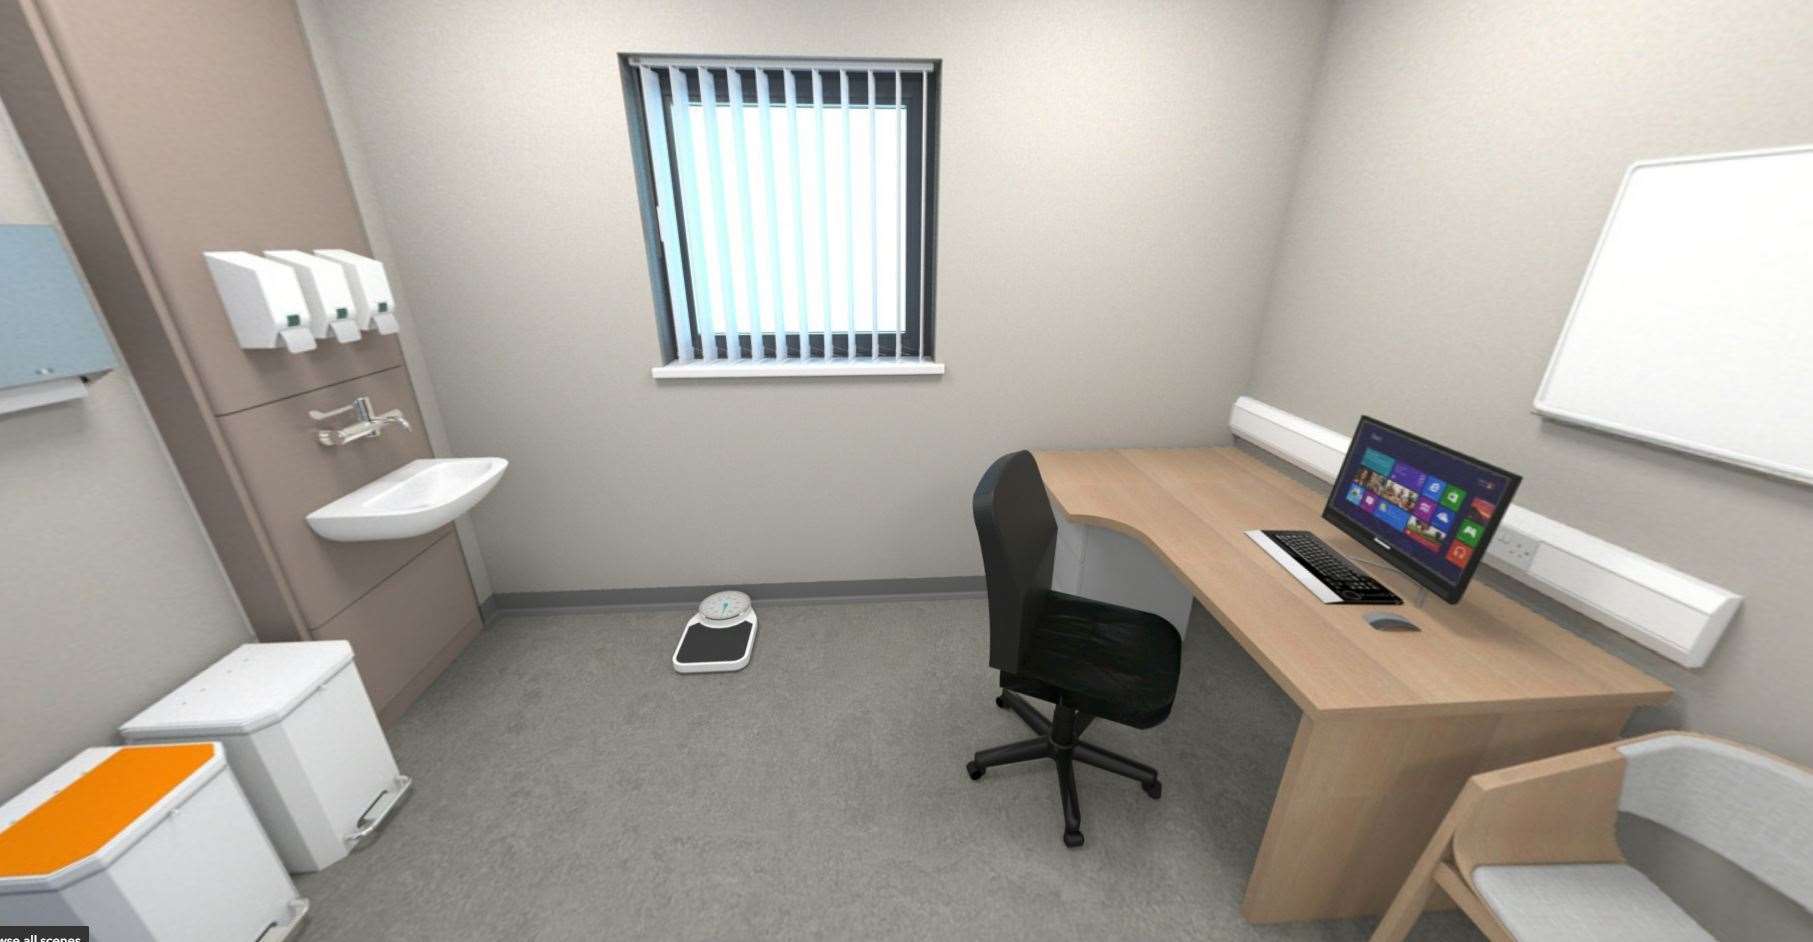 How one of the consulting rooms will look